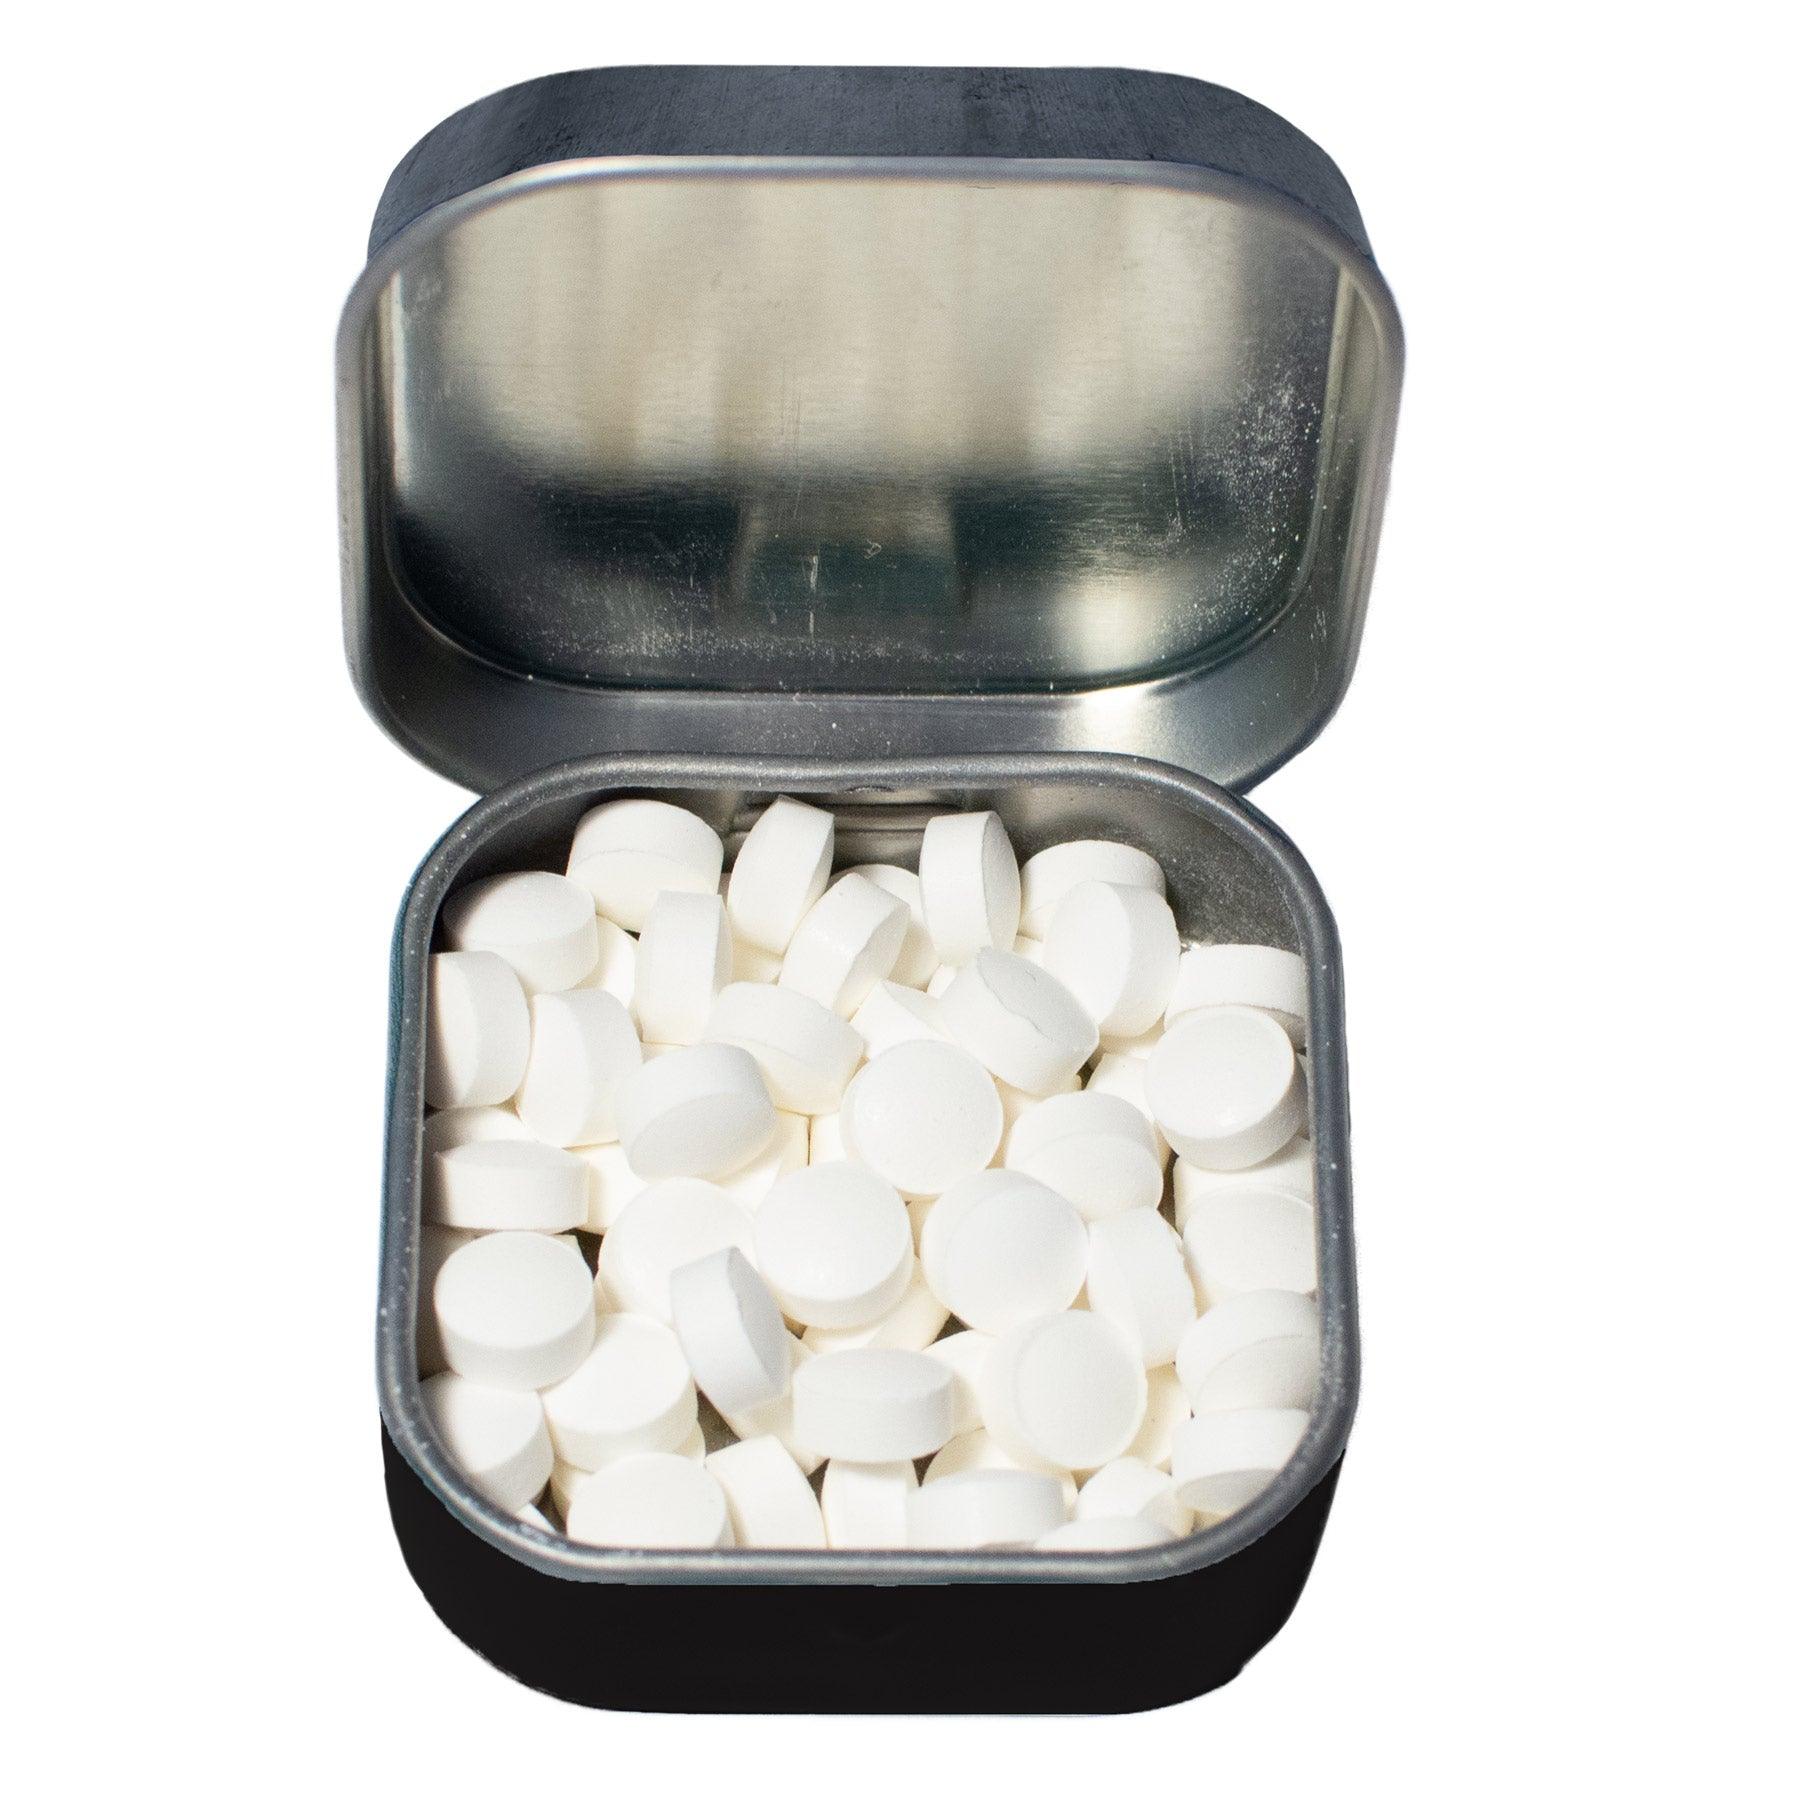 Product photo of Einstein Relativity Mints, a novelty gift manufactured by The Unemployed Philosophers Guild.